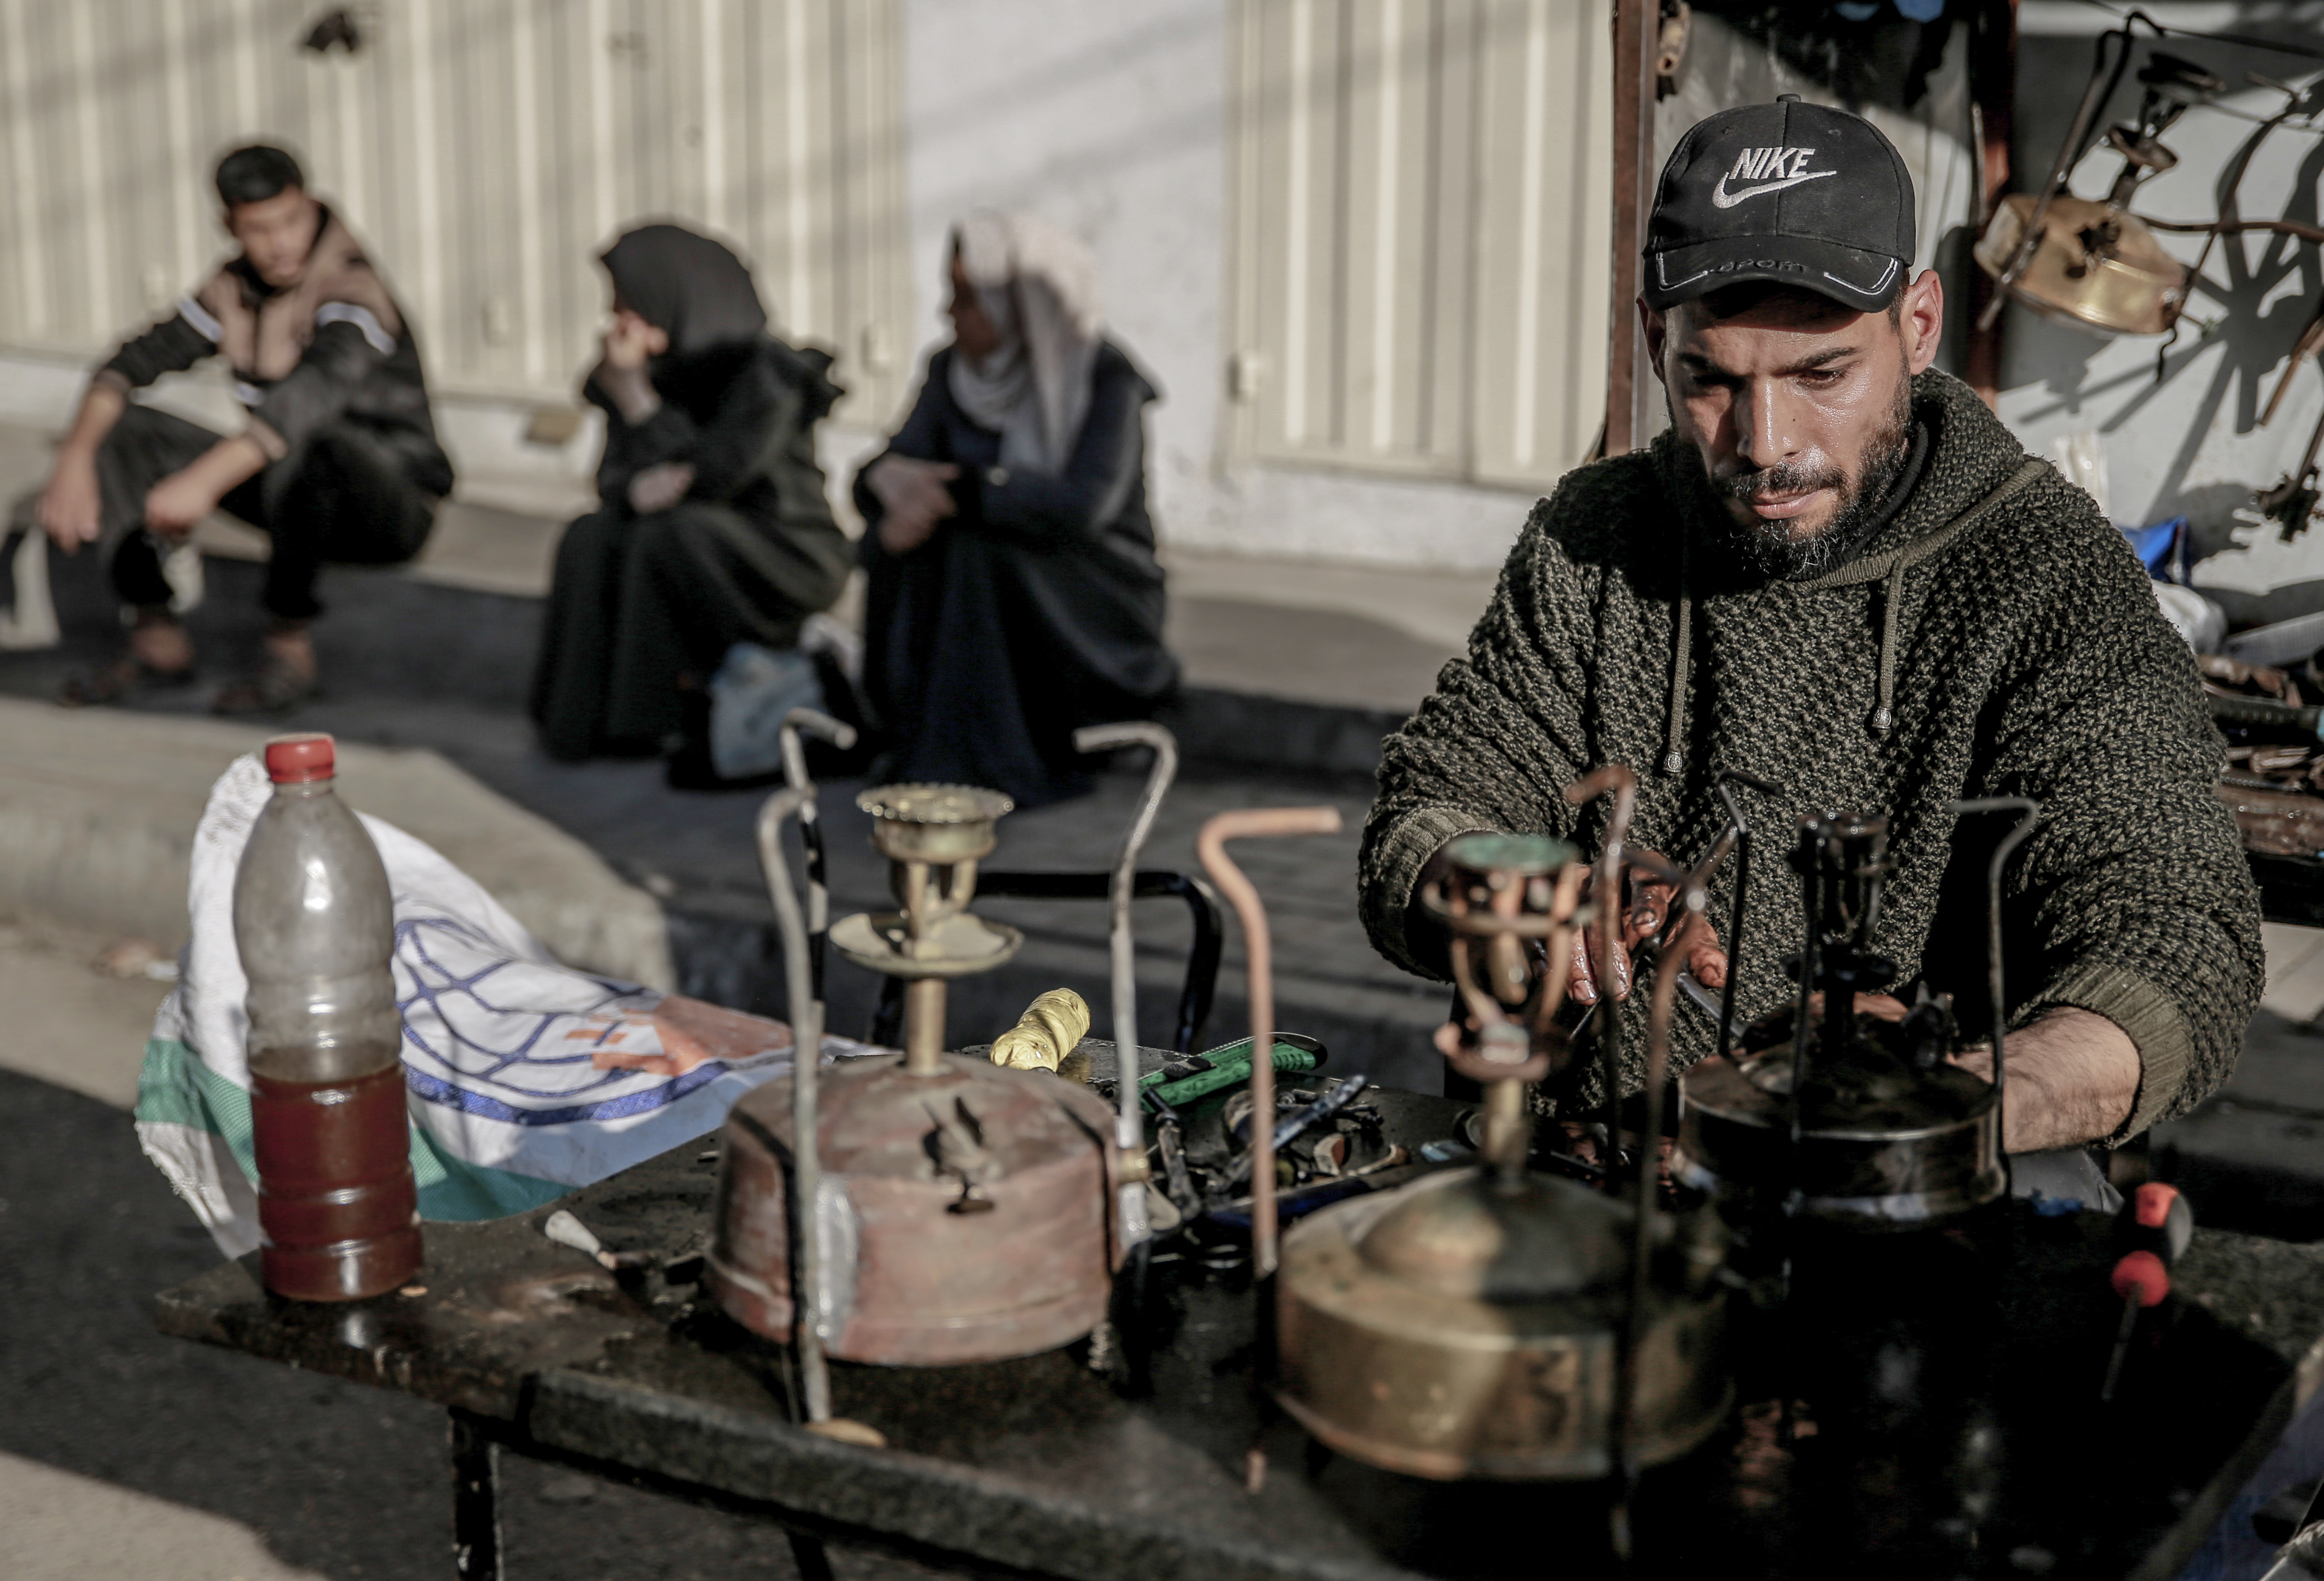 37-year-old Mahmoud Al-Najjar repairs old kerosene stoves and makes them usable again as Palestinian people have resorted to old methods of cooking due to the full embargo imposed by Israel on Gaza, on February 21